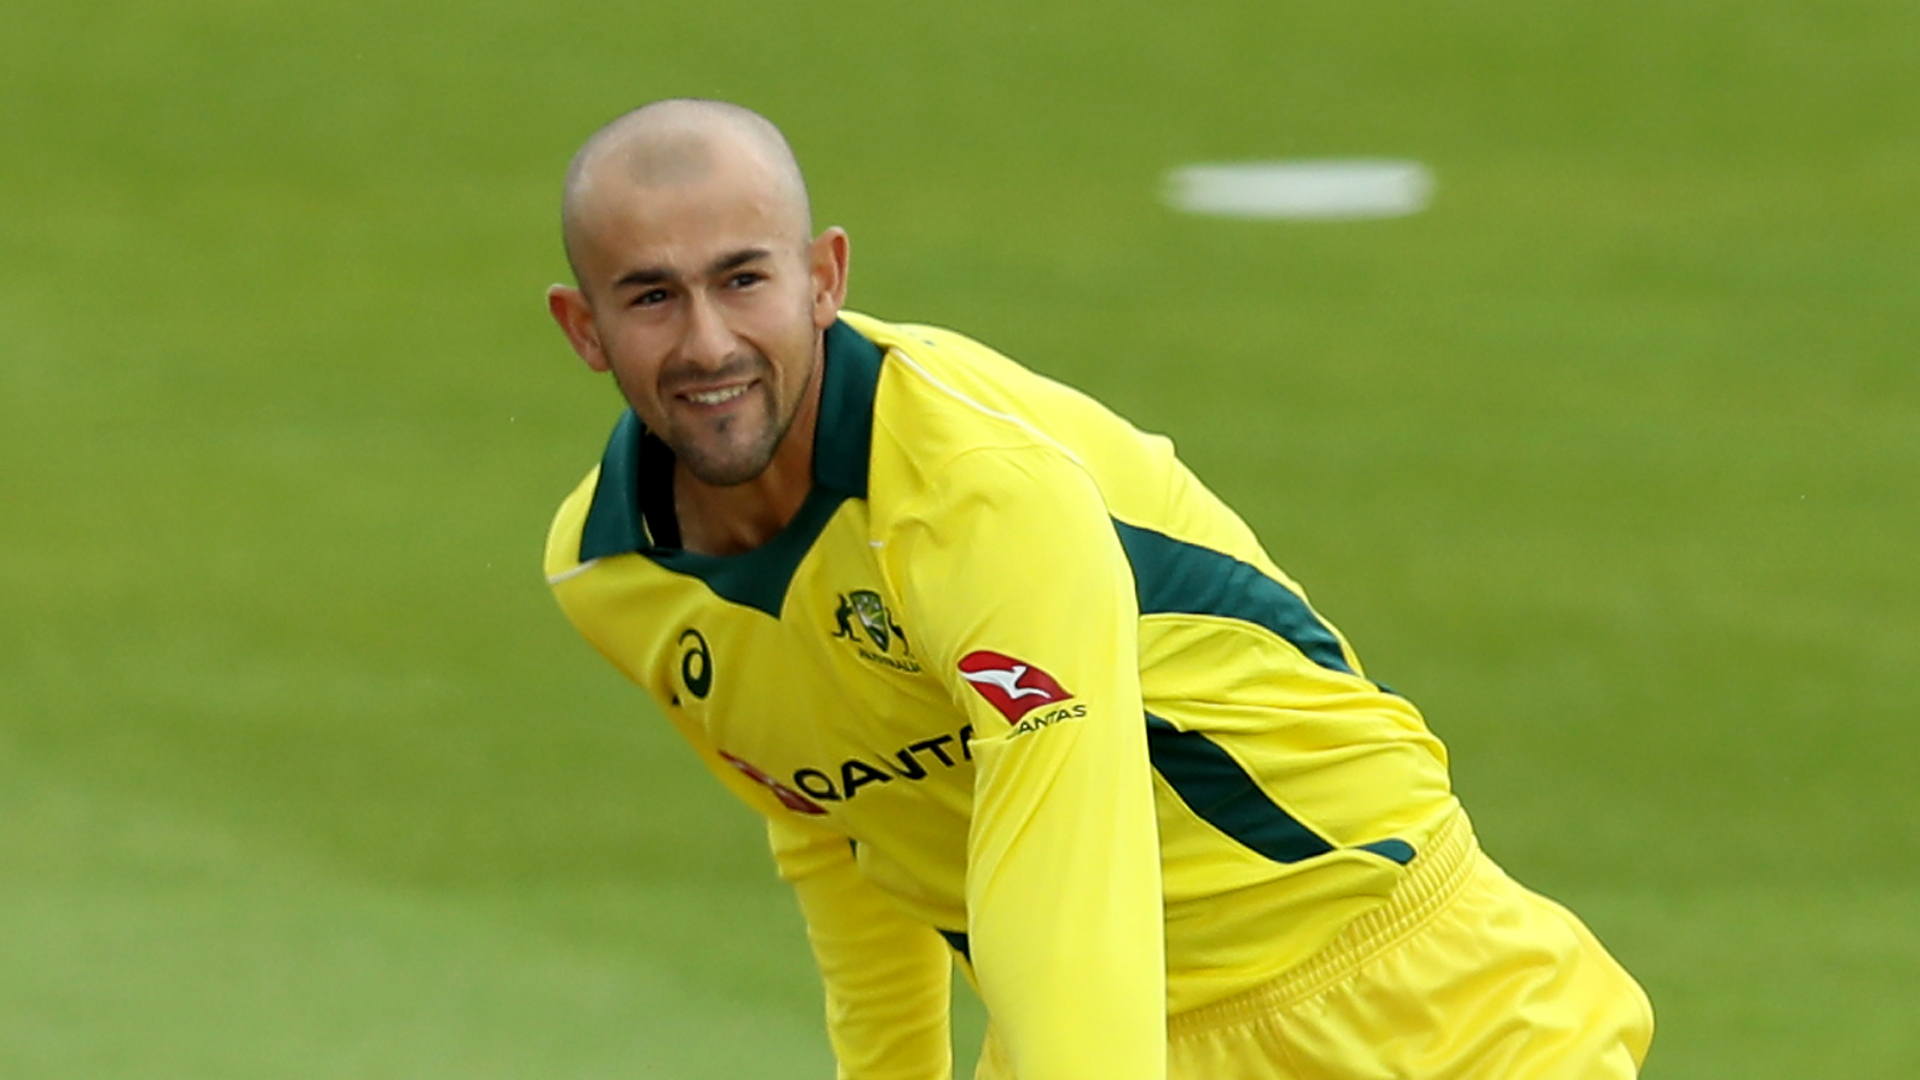 South Africa were skittled for 89 by Australia at the Wanderers, as leg-spinner Ashton Agar took five wickets including a hat-trick.